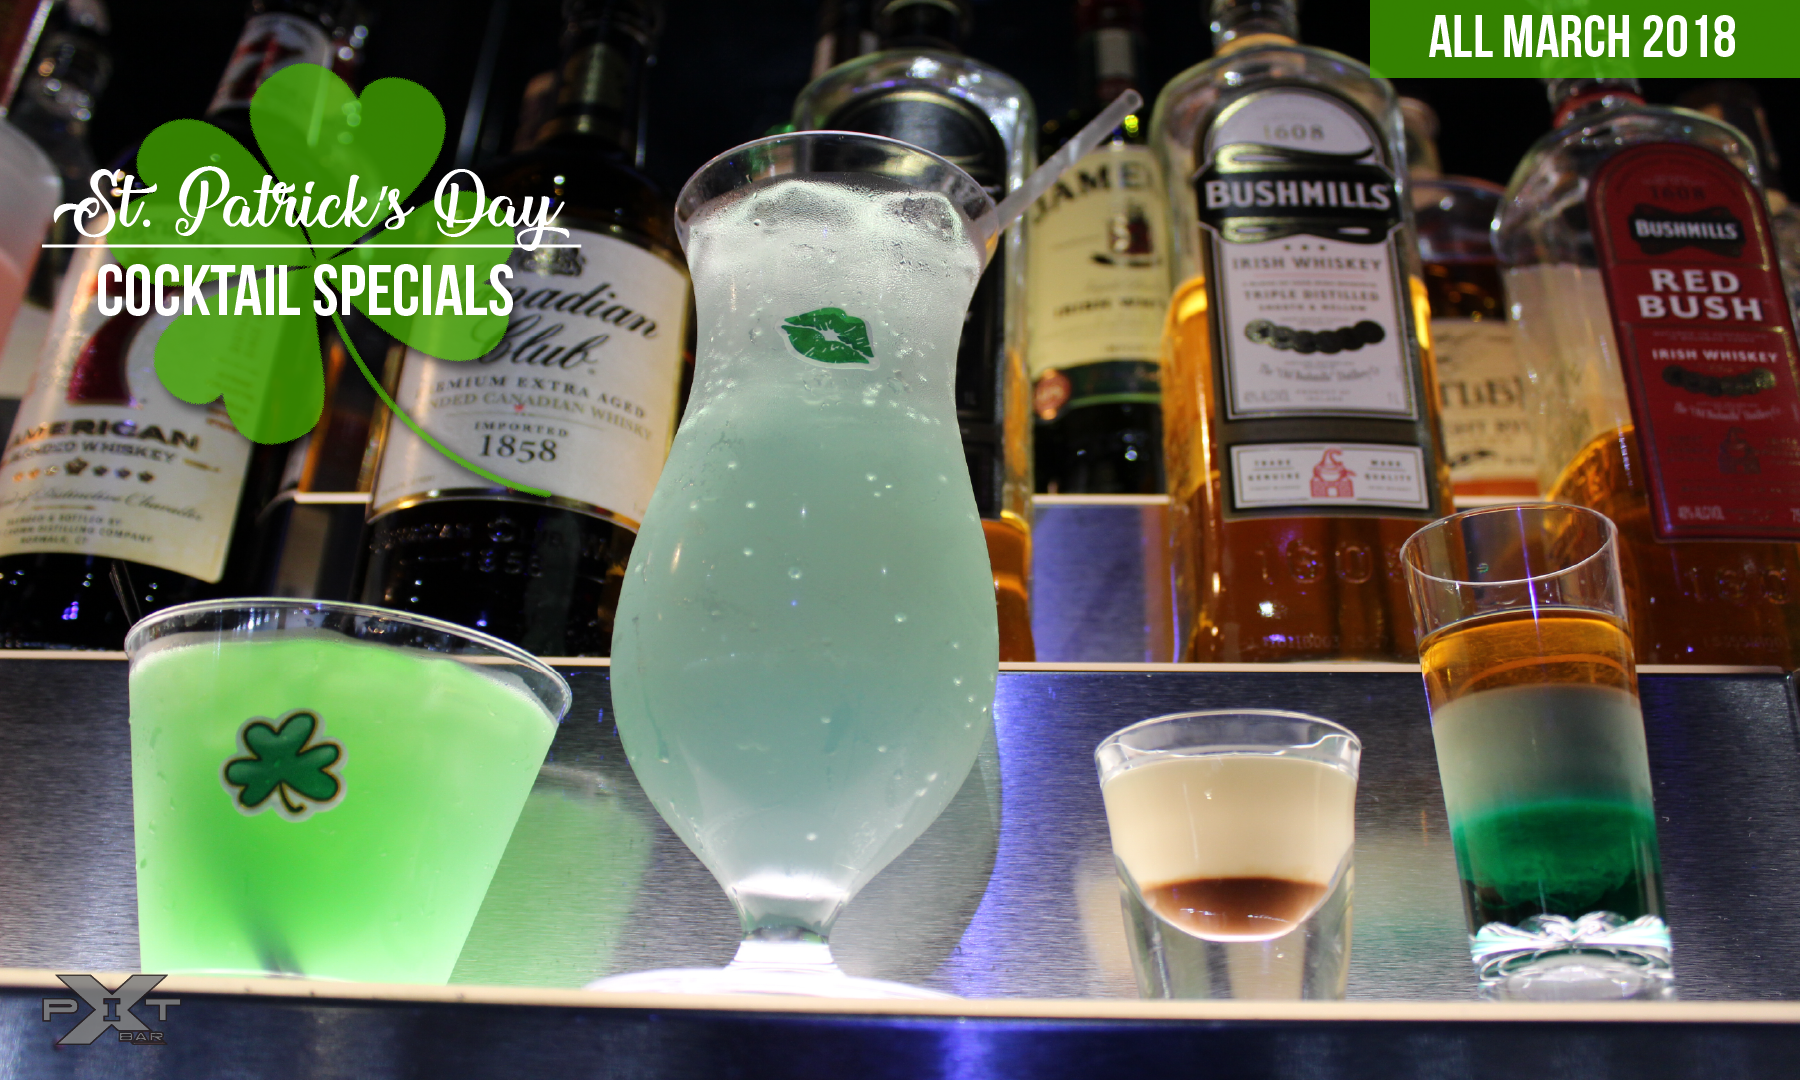 St. Patrick’s Day Cocktail Specials at The Pit Bar